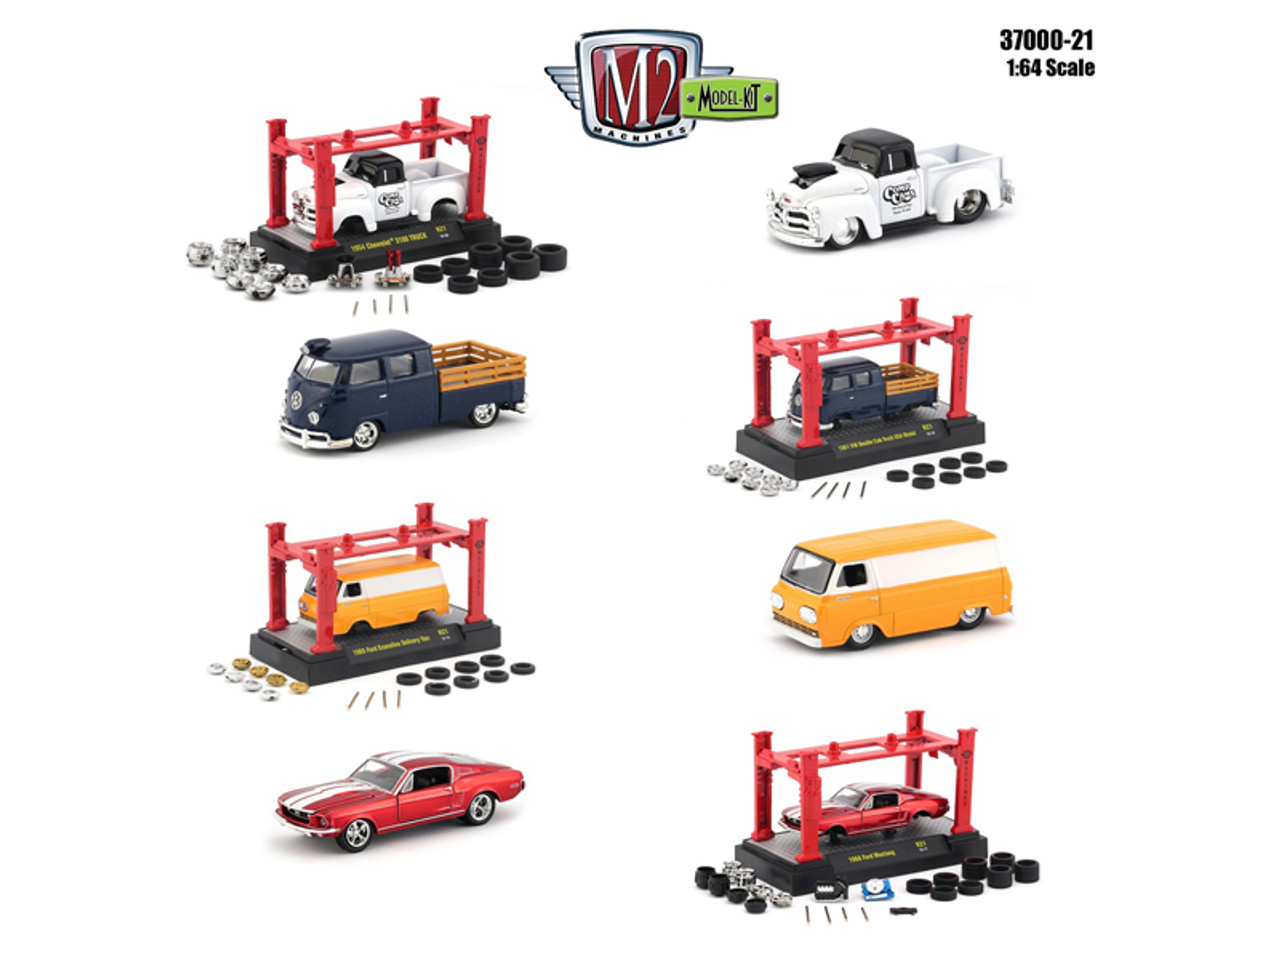 Model Kit 4 pieces Set Release 21 1/64 Diecast Model Cars by M2 Machines